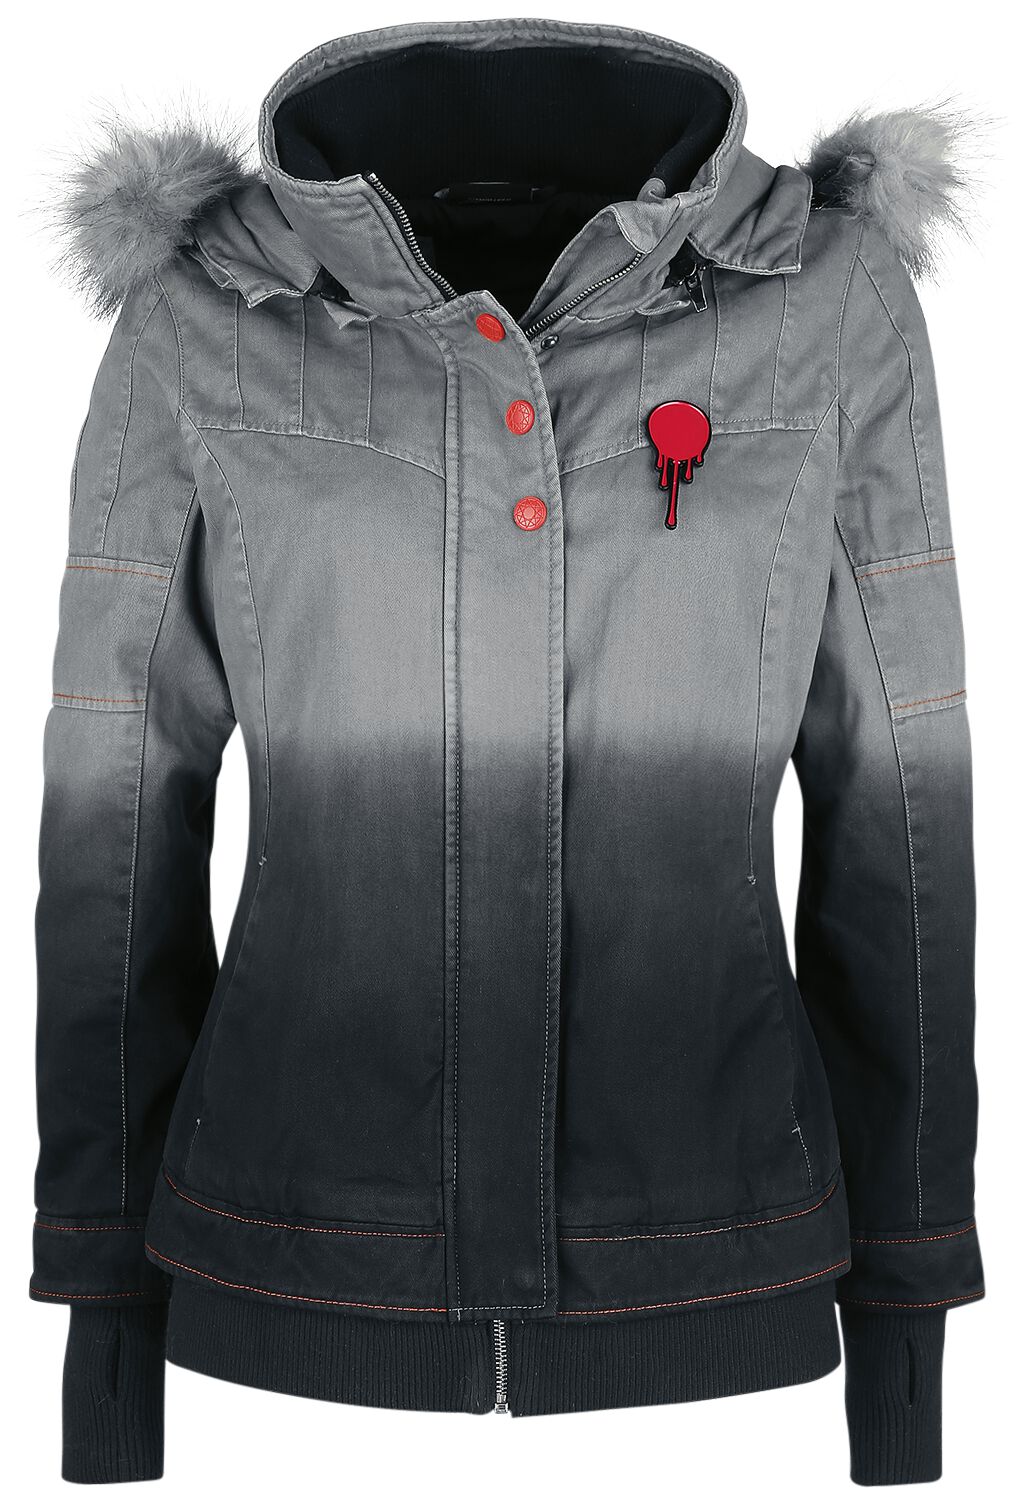 IT Chapter 2 - Pennywise Winter Jacket grey